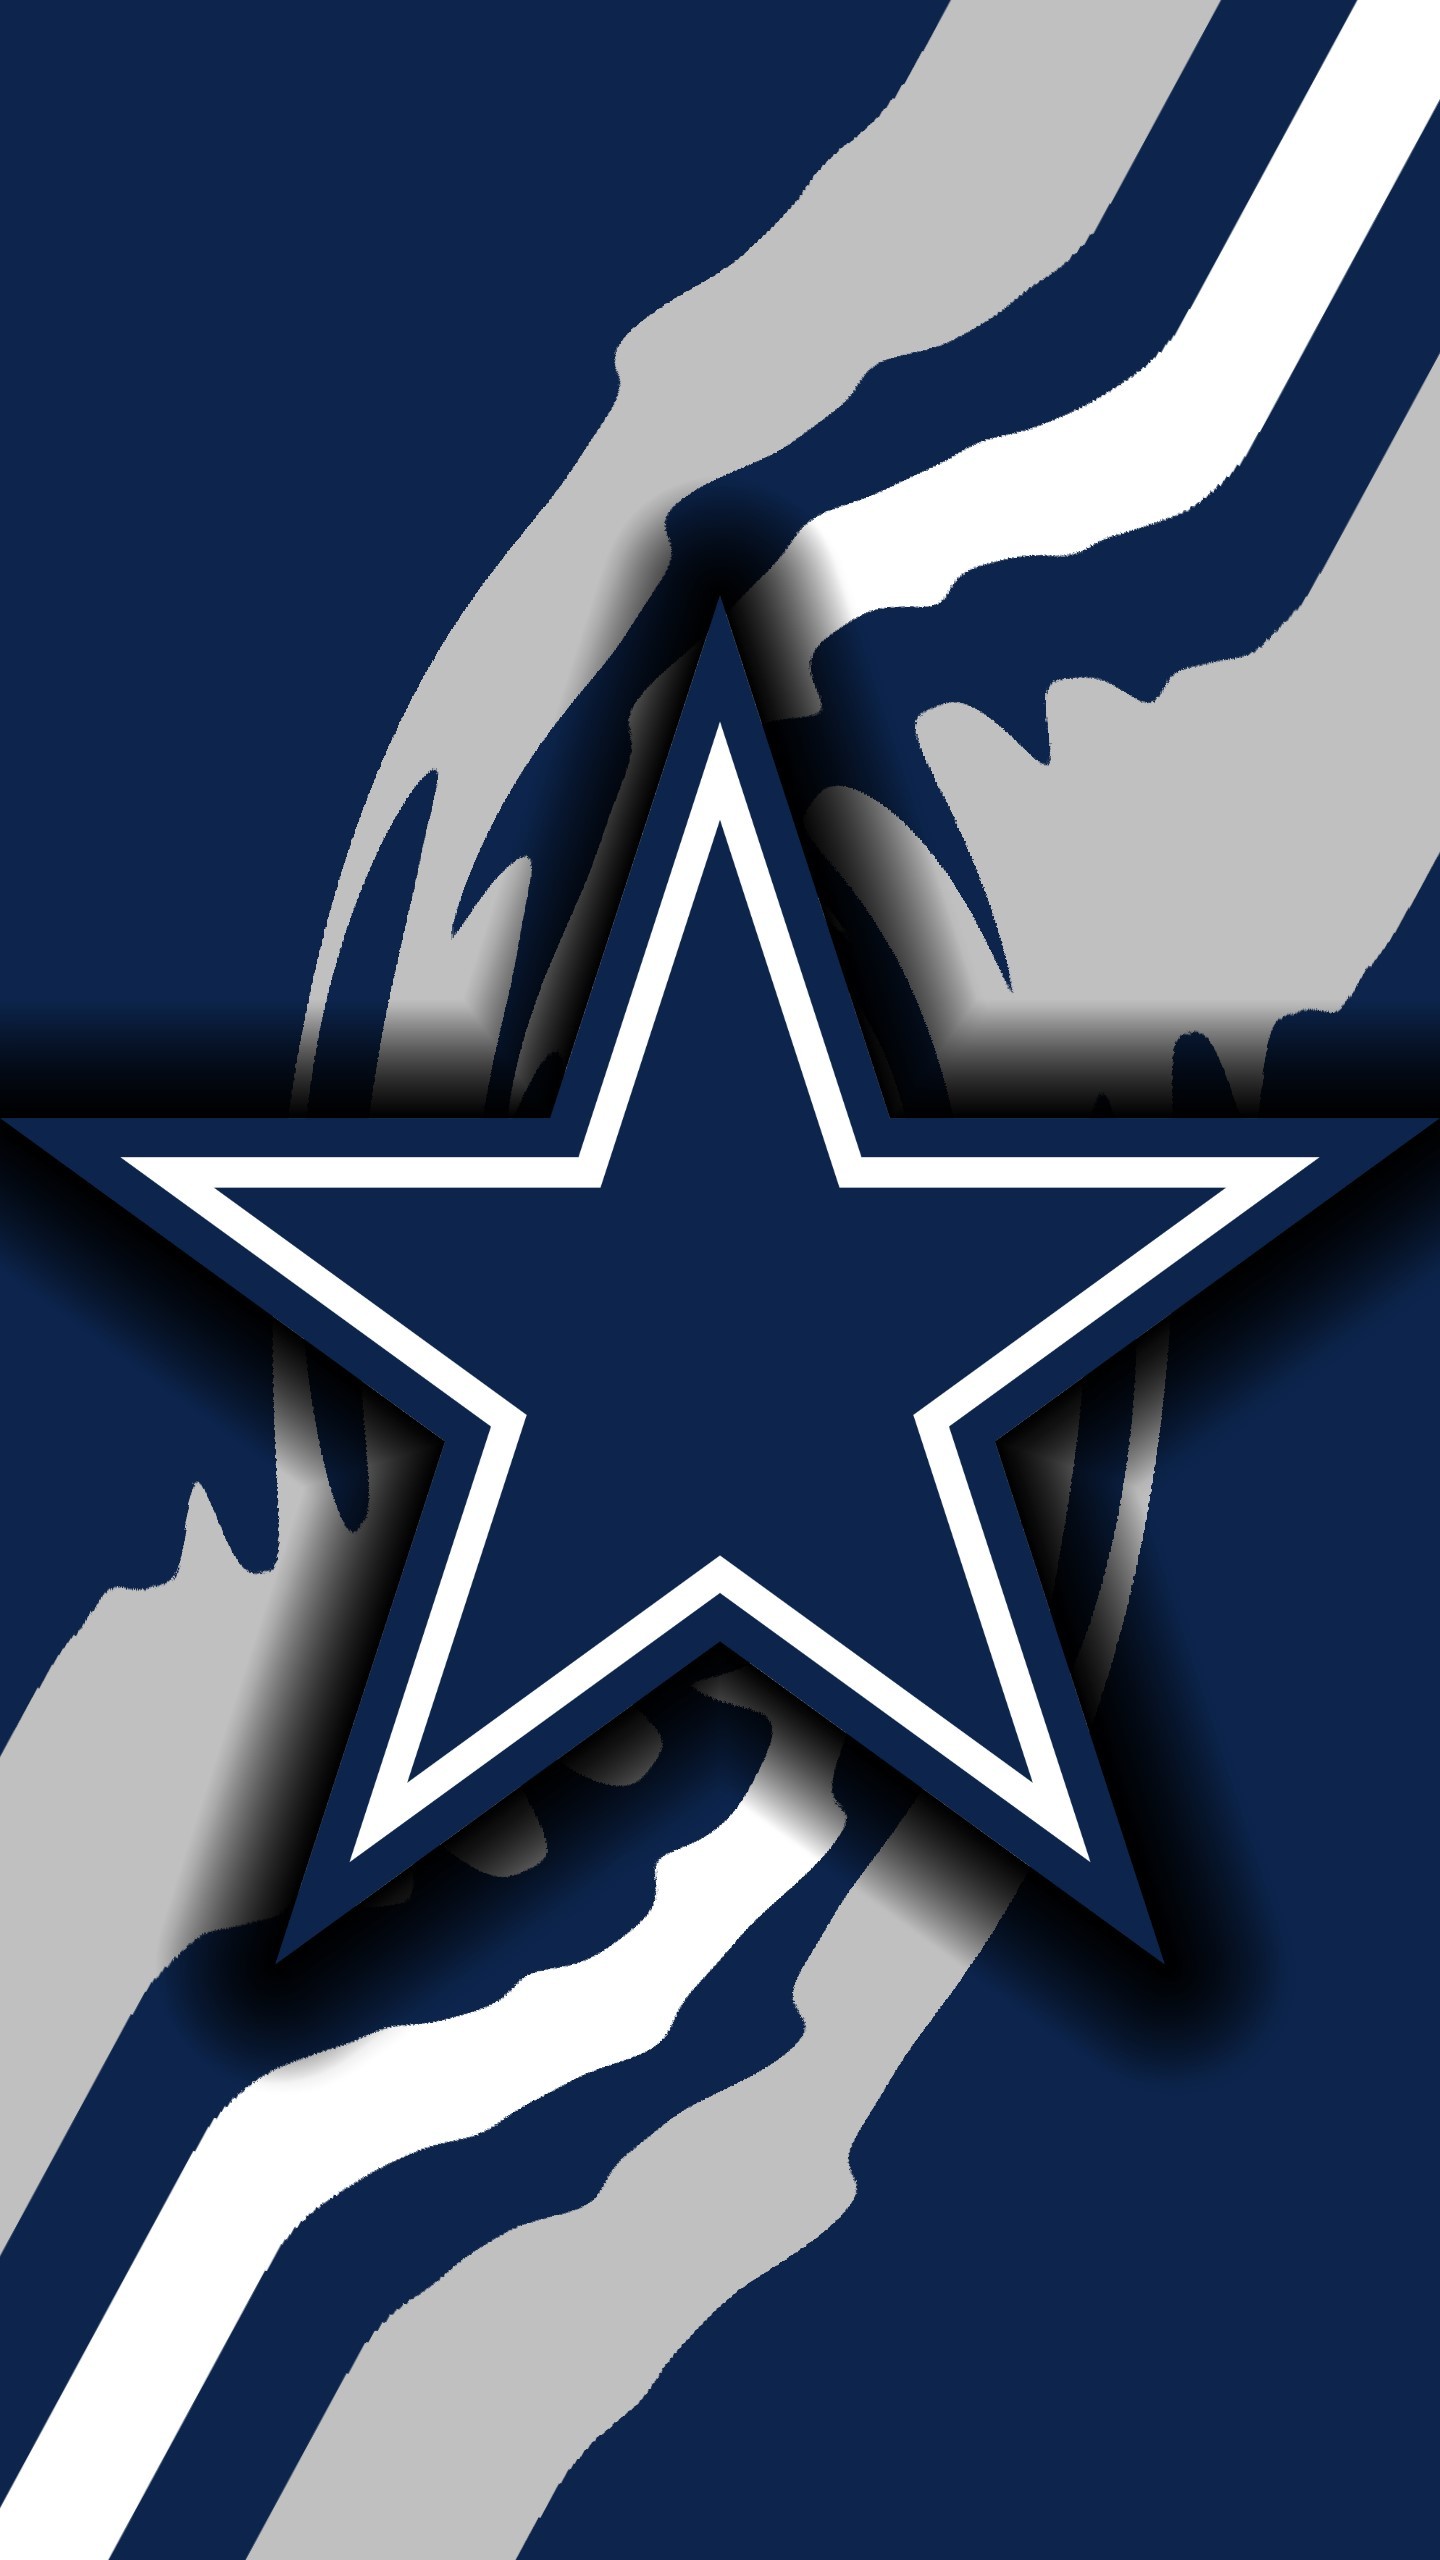 Dallas Cowboys Wallpaper for iPhone (72+ images)